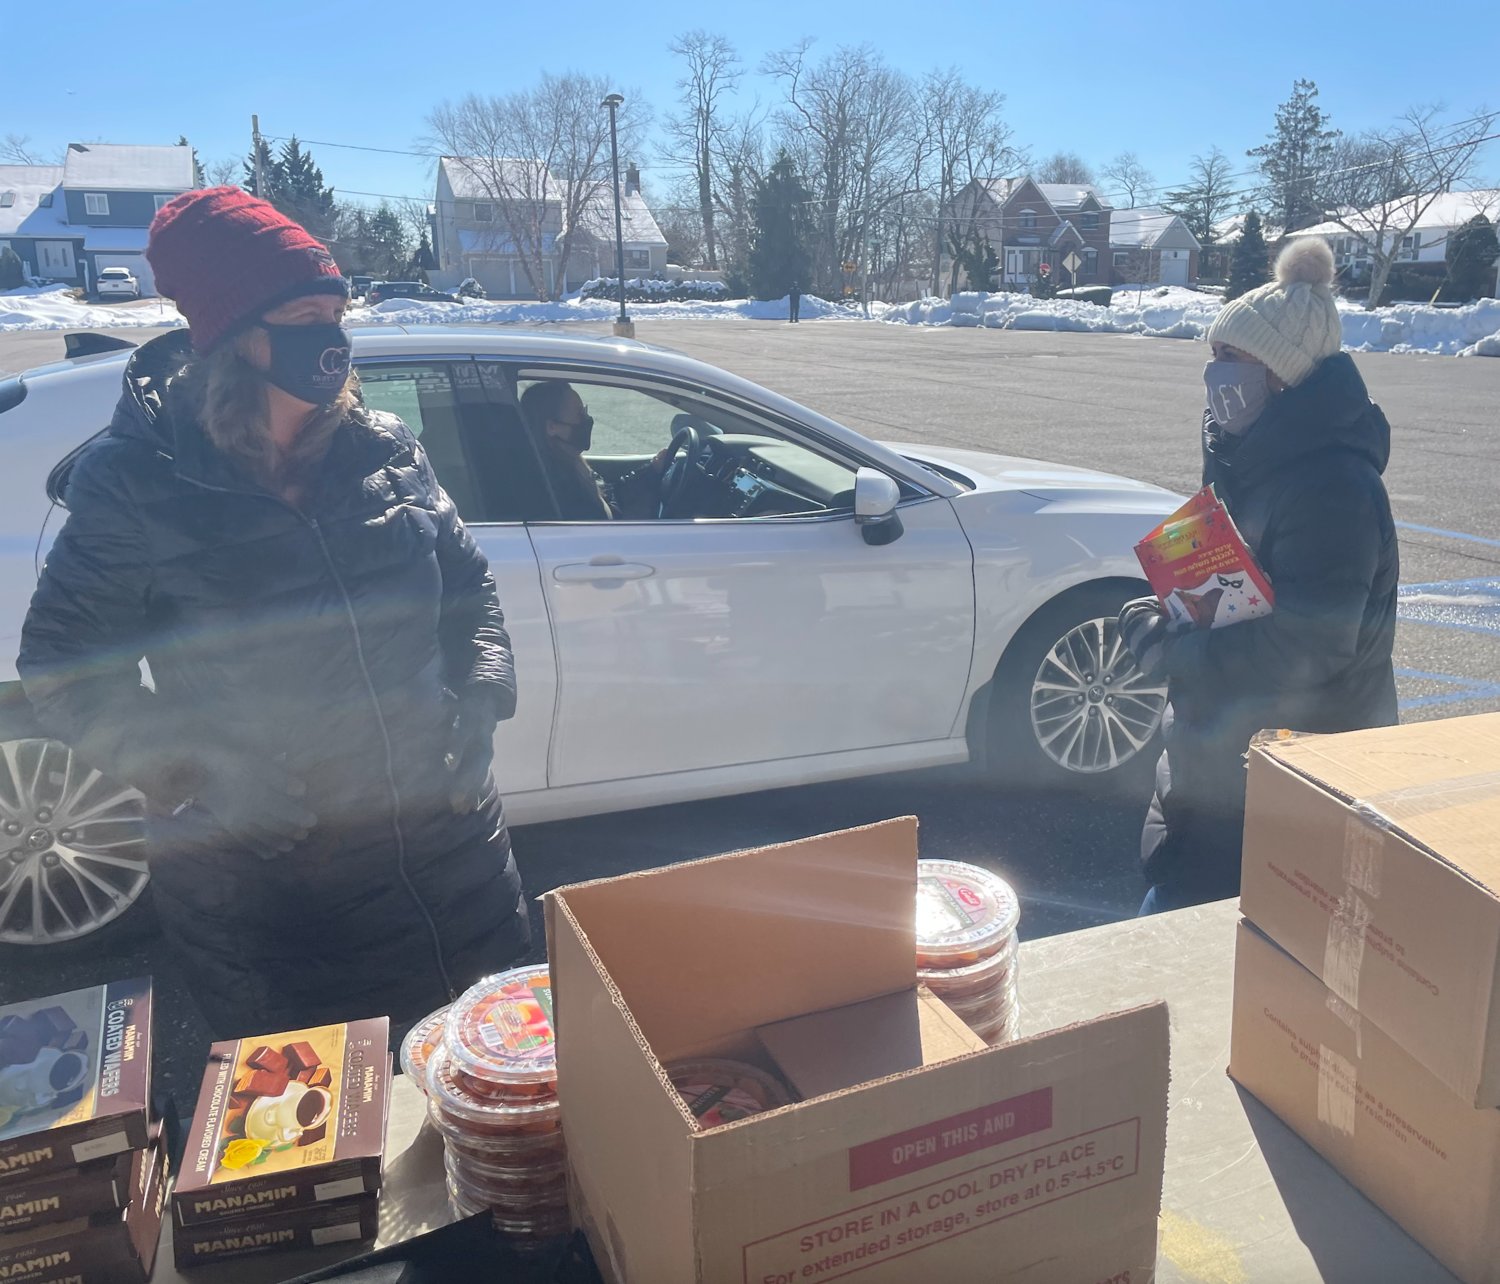 On Feb. 21, Merrick Jewish Centre volunteers distributed shalach manot packages to hundreds of congregants so they could celebrate Purim in style.